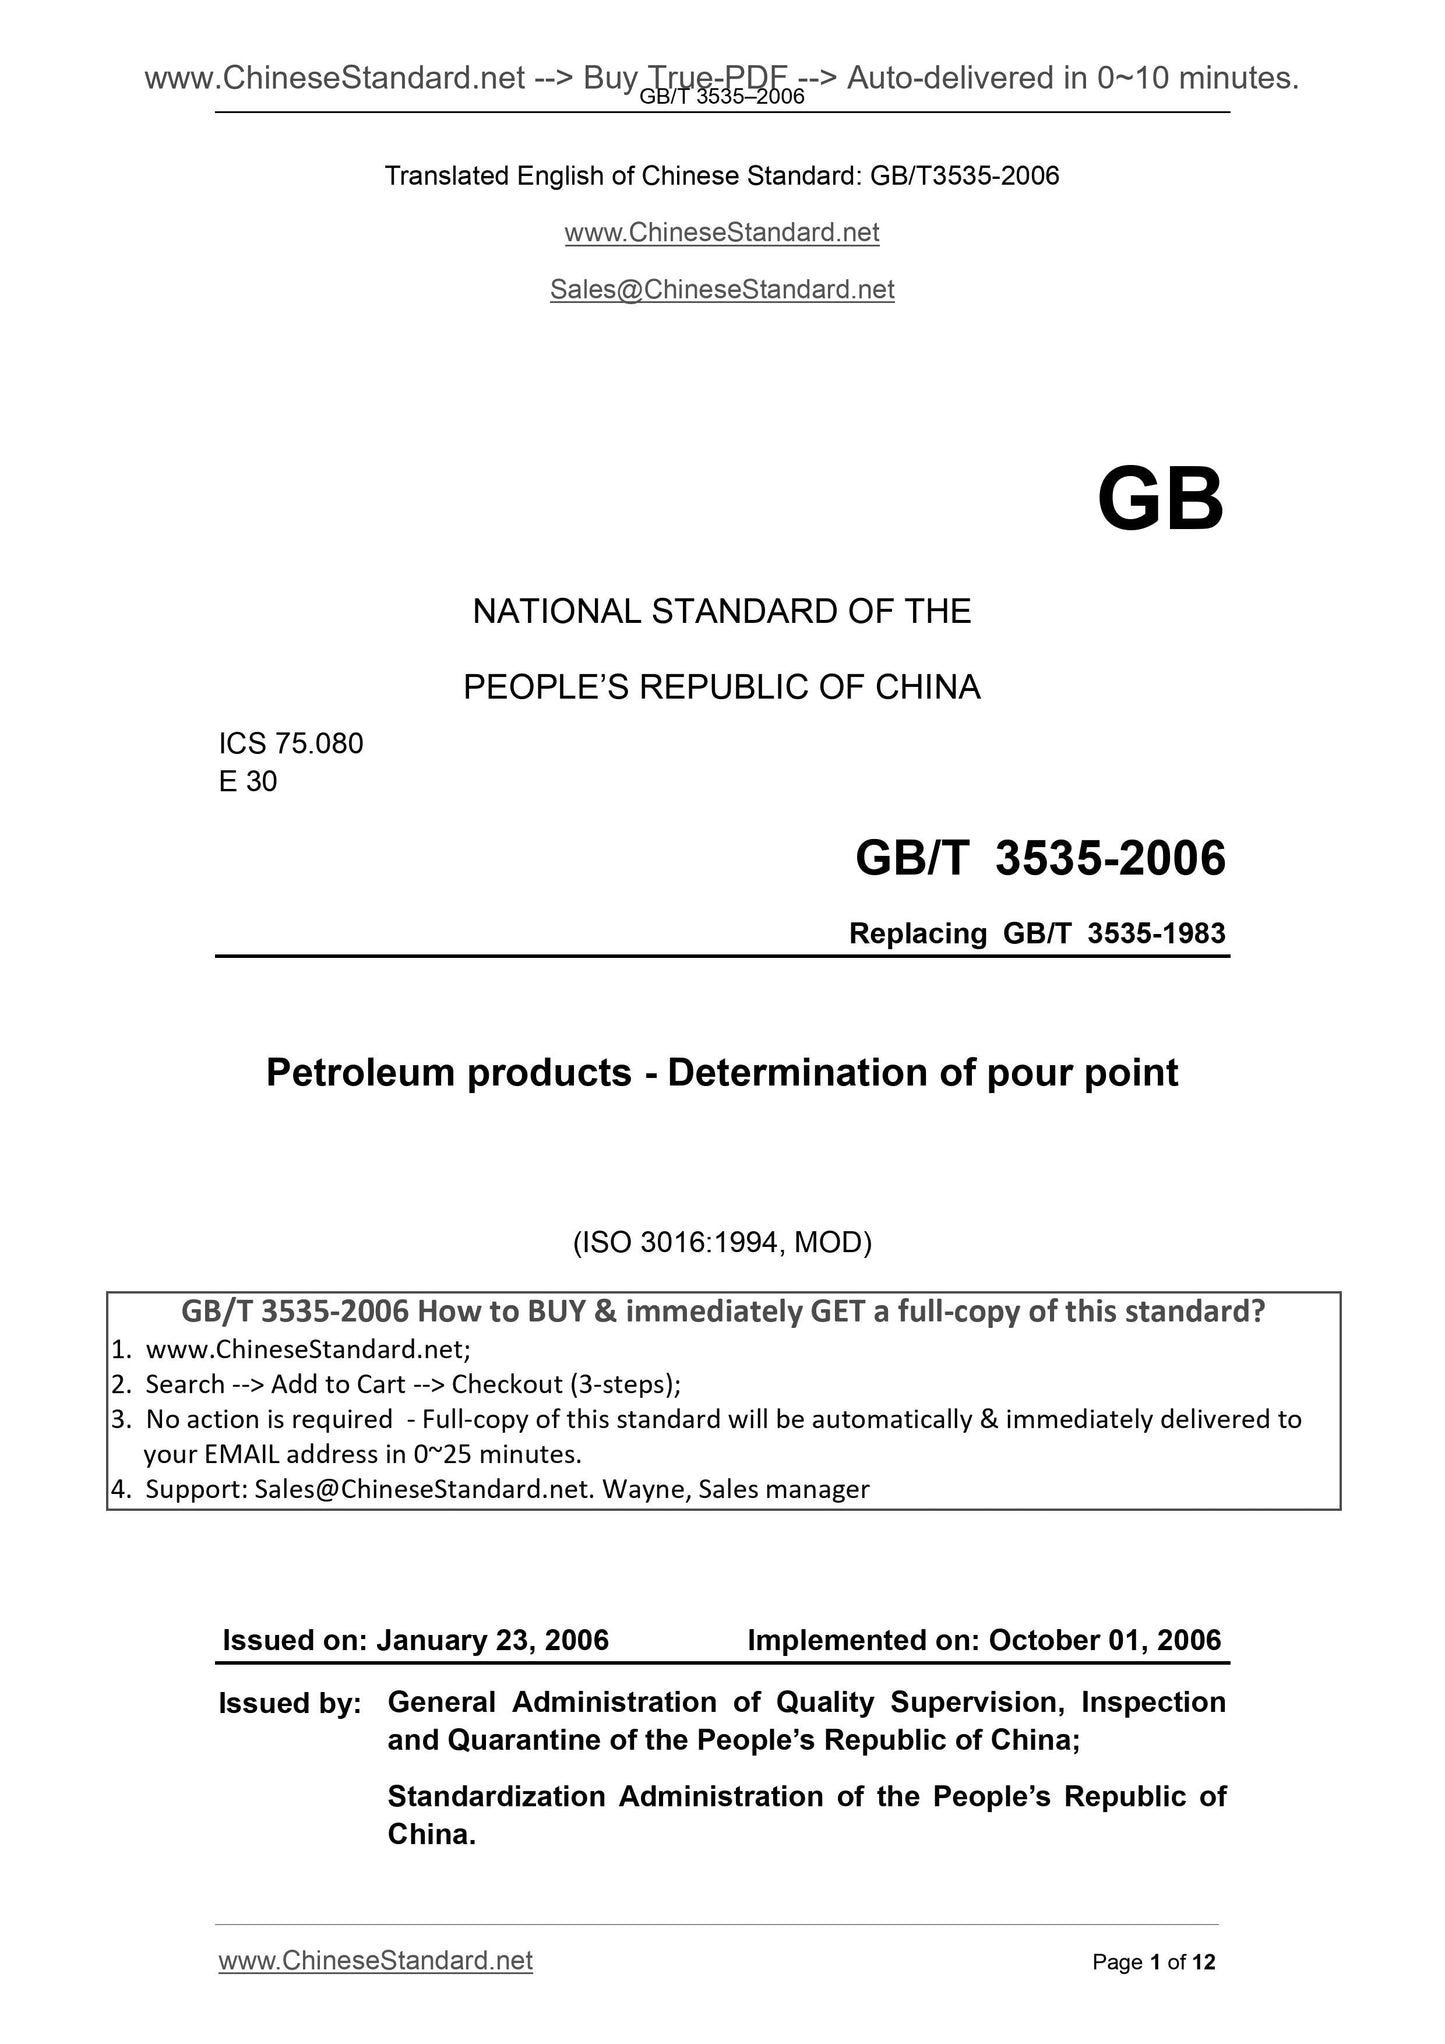 GB/T 3535-2006 Page 1